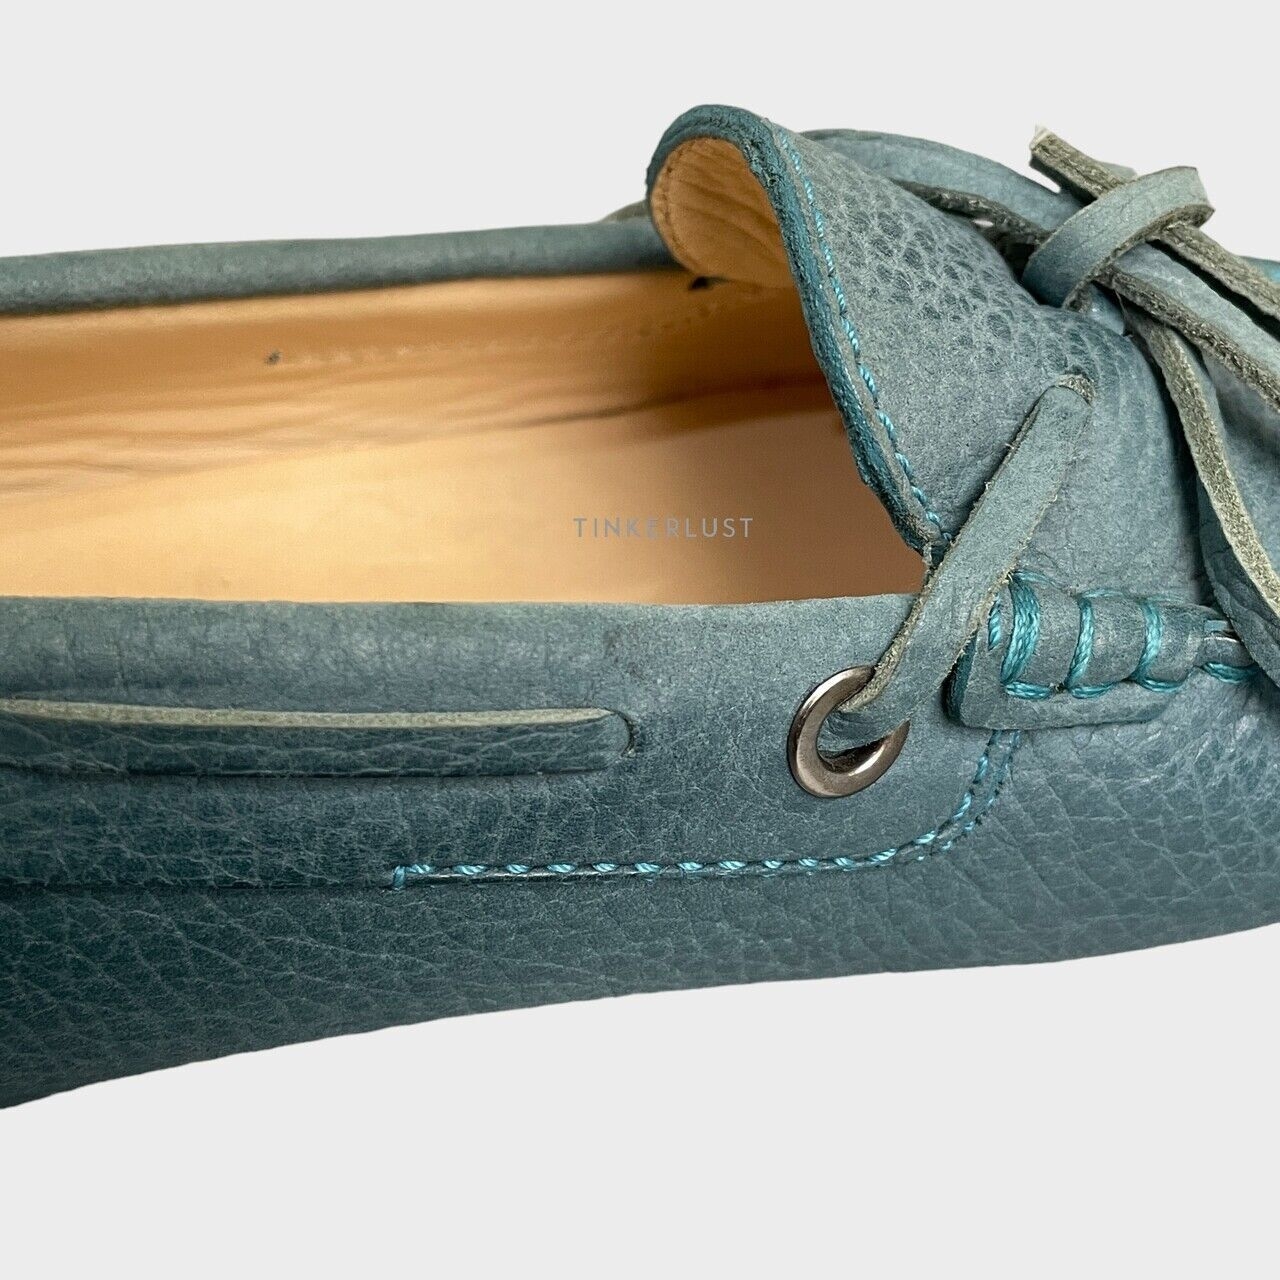 Tod's Gommino Driving Blue Leather Flats